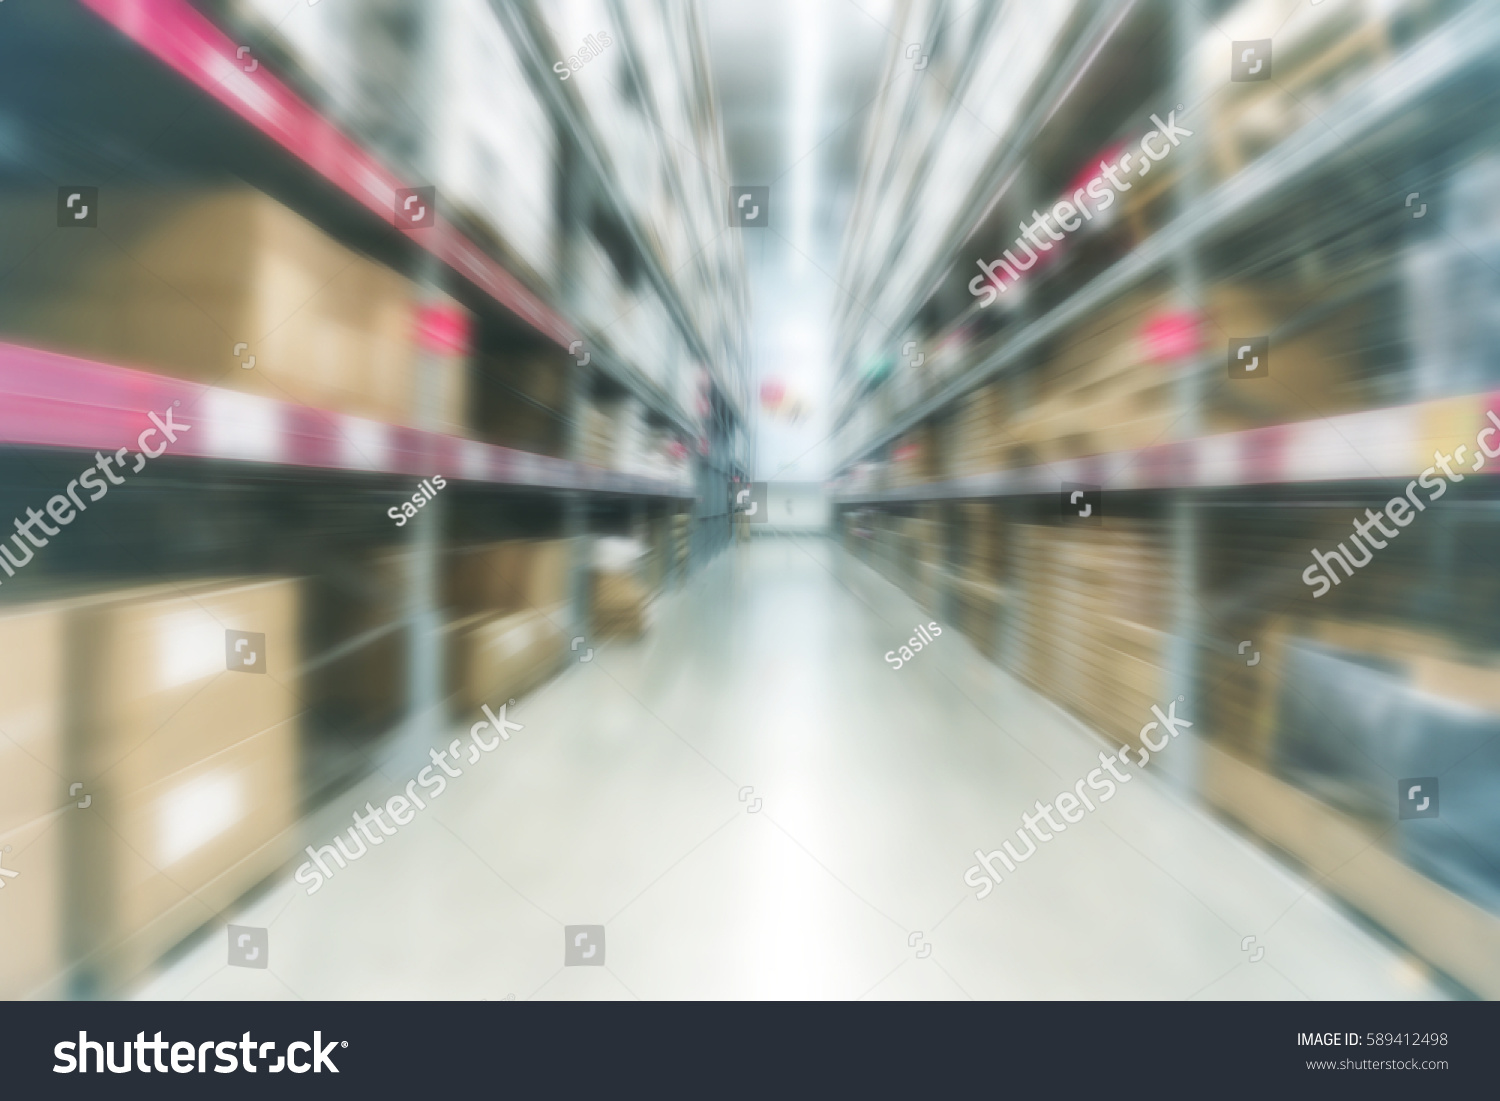 Blur background large indoor warehouse with high racks and products store on it for supply chain procurement operation logistic process e-commerce distribution omi channel b2b, b2c value chain concept #589412498